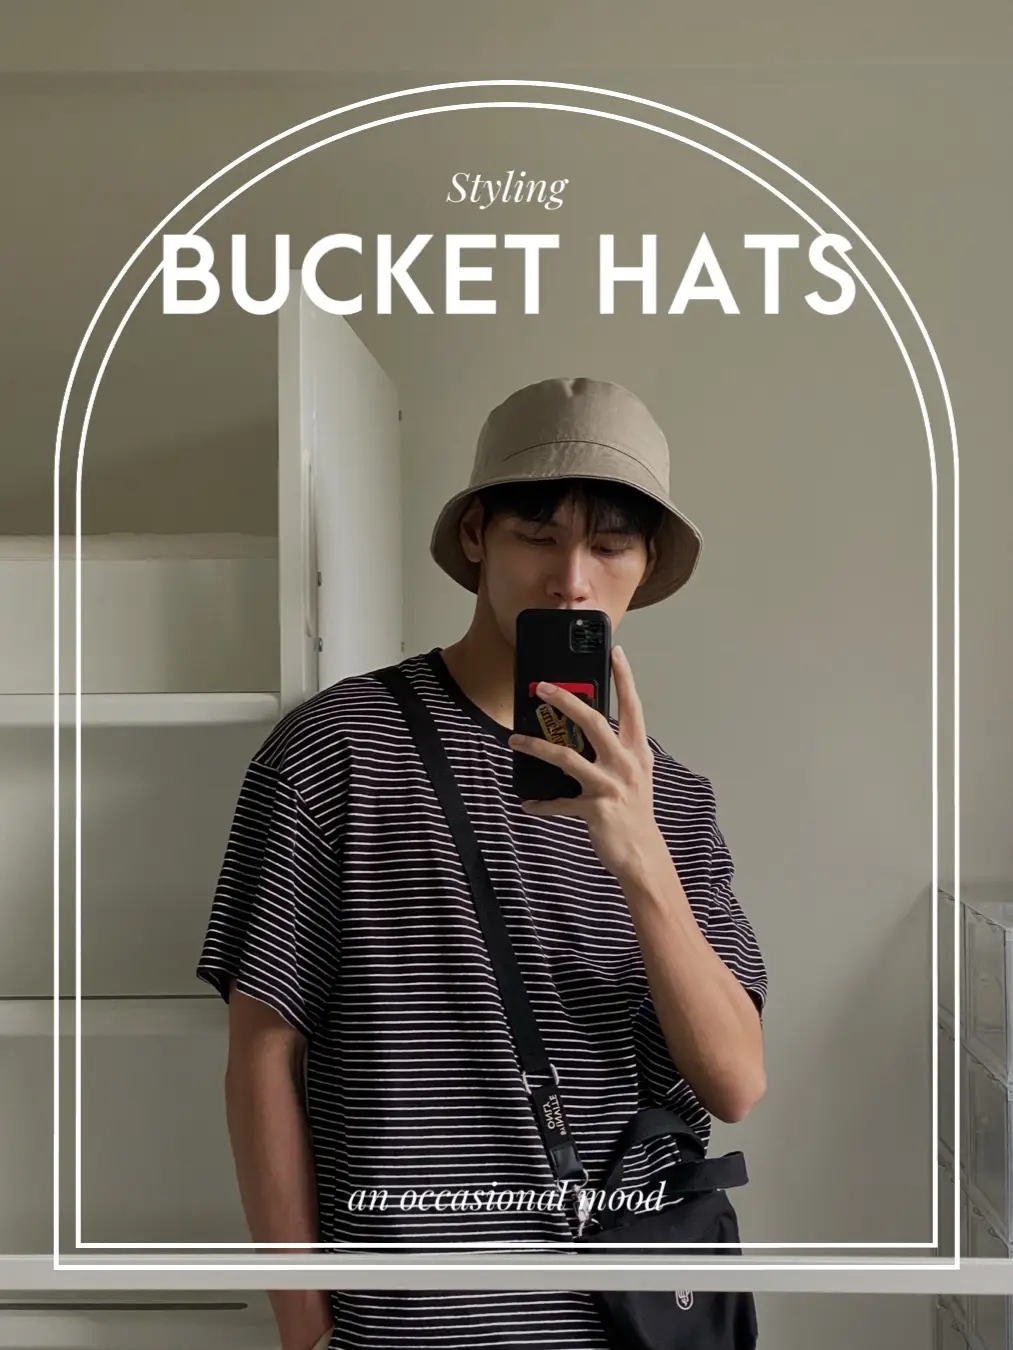 styling bucket hats 👒, Gallery posted by darrenjong